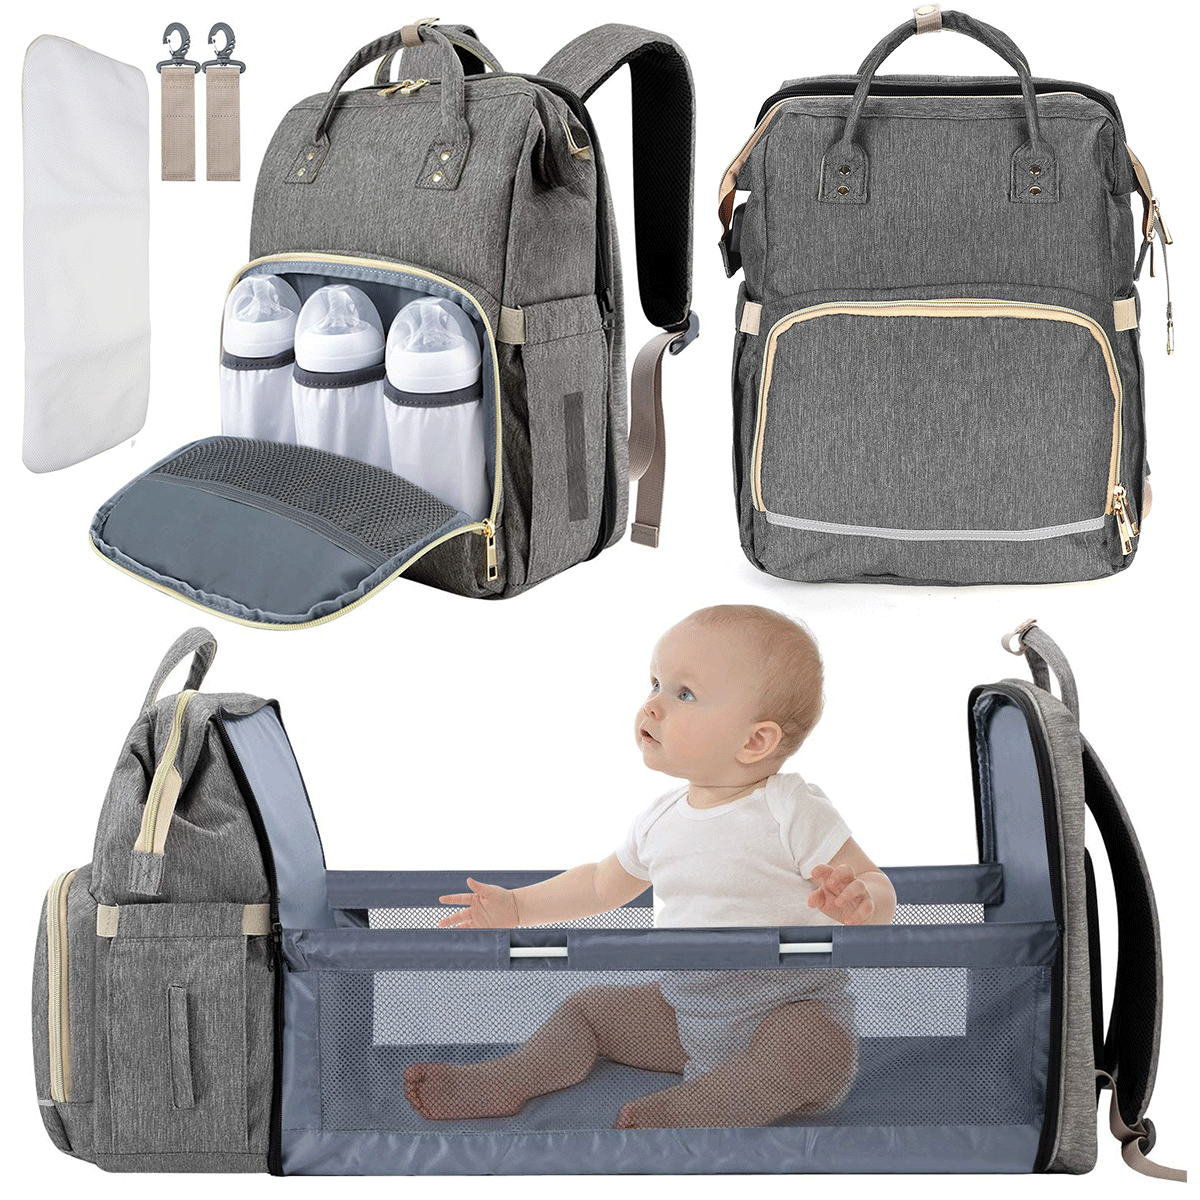 Large Unisex Baby Bags for Boys Girls CALIYO Diaper Bag Backpack with Portable Changing Pad Multipurpose Travel Back Pack for Moms Dads Dark Grey 